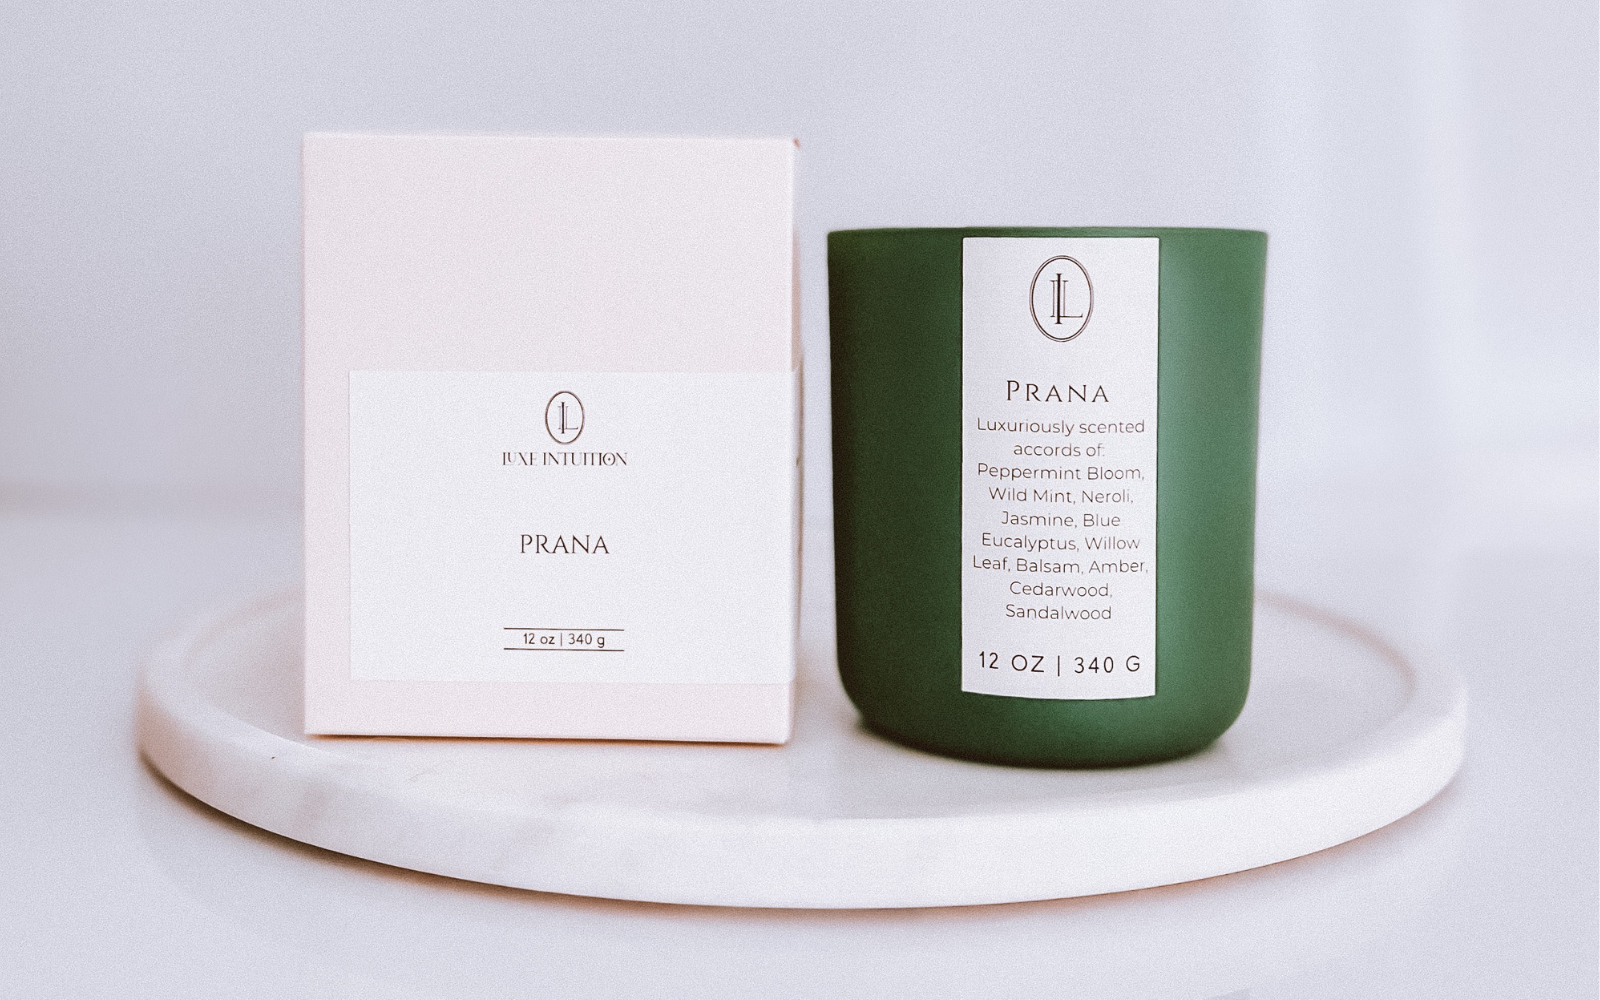 Prana scented wood wick candle and box